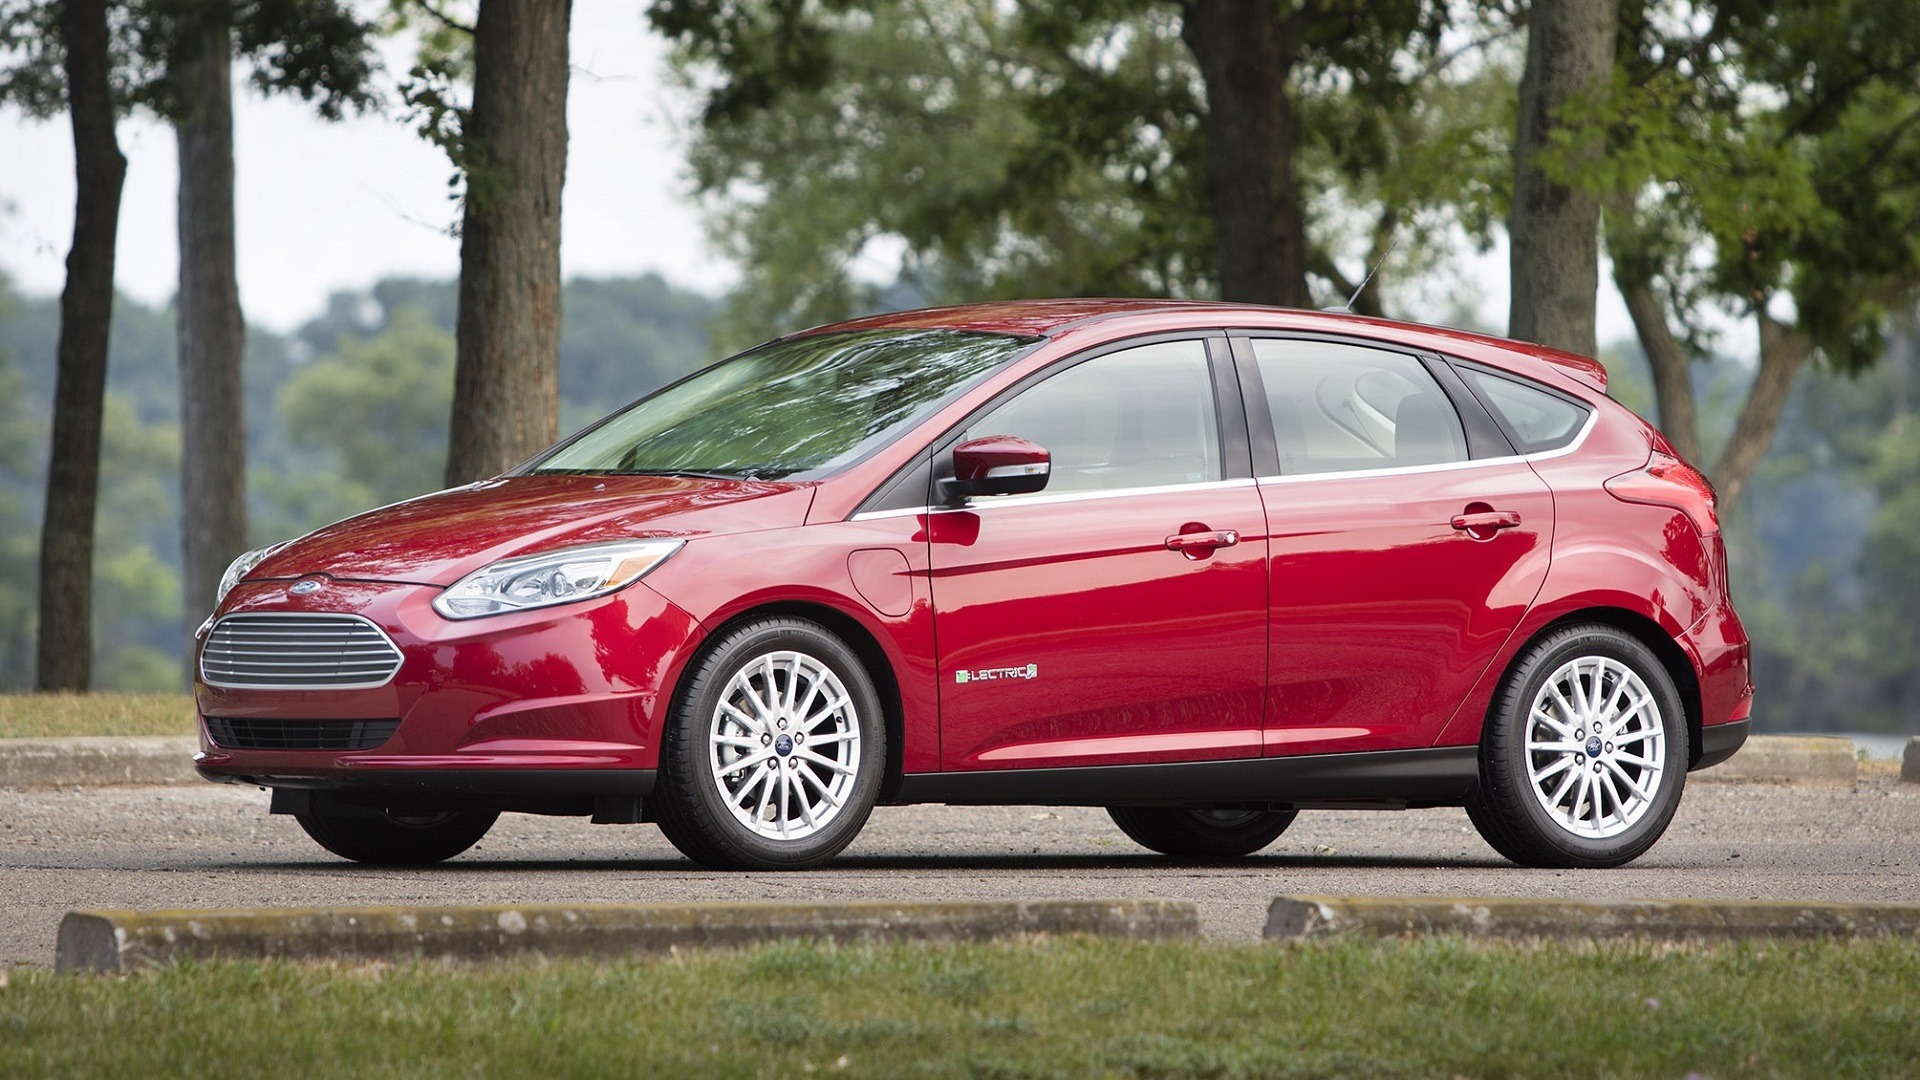 Ford Focus Electric - Affordable Electric cars